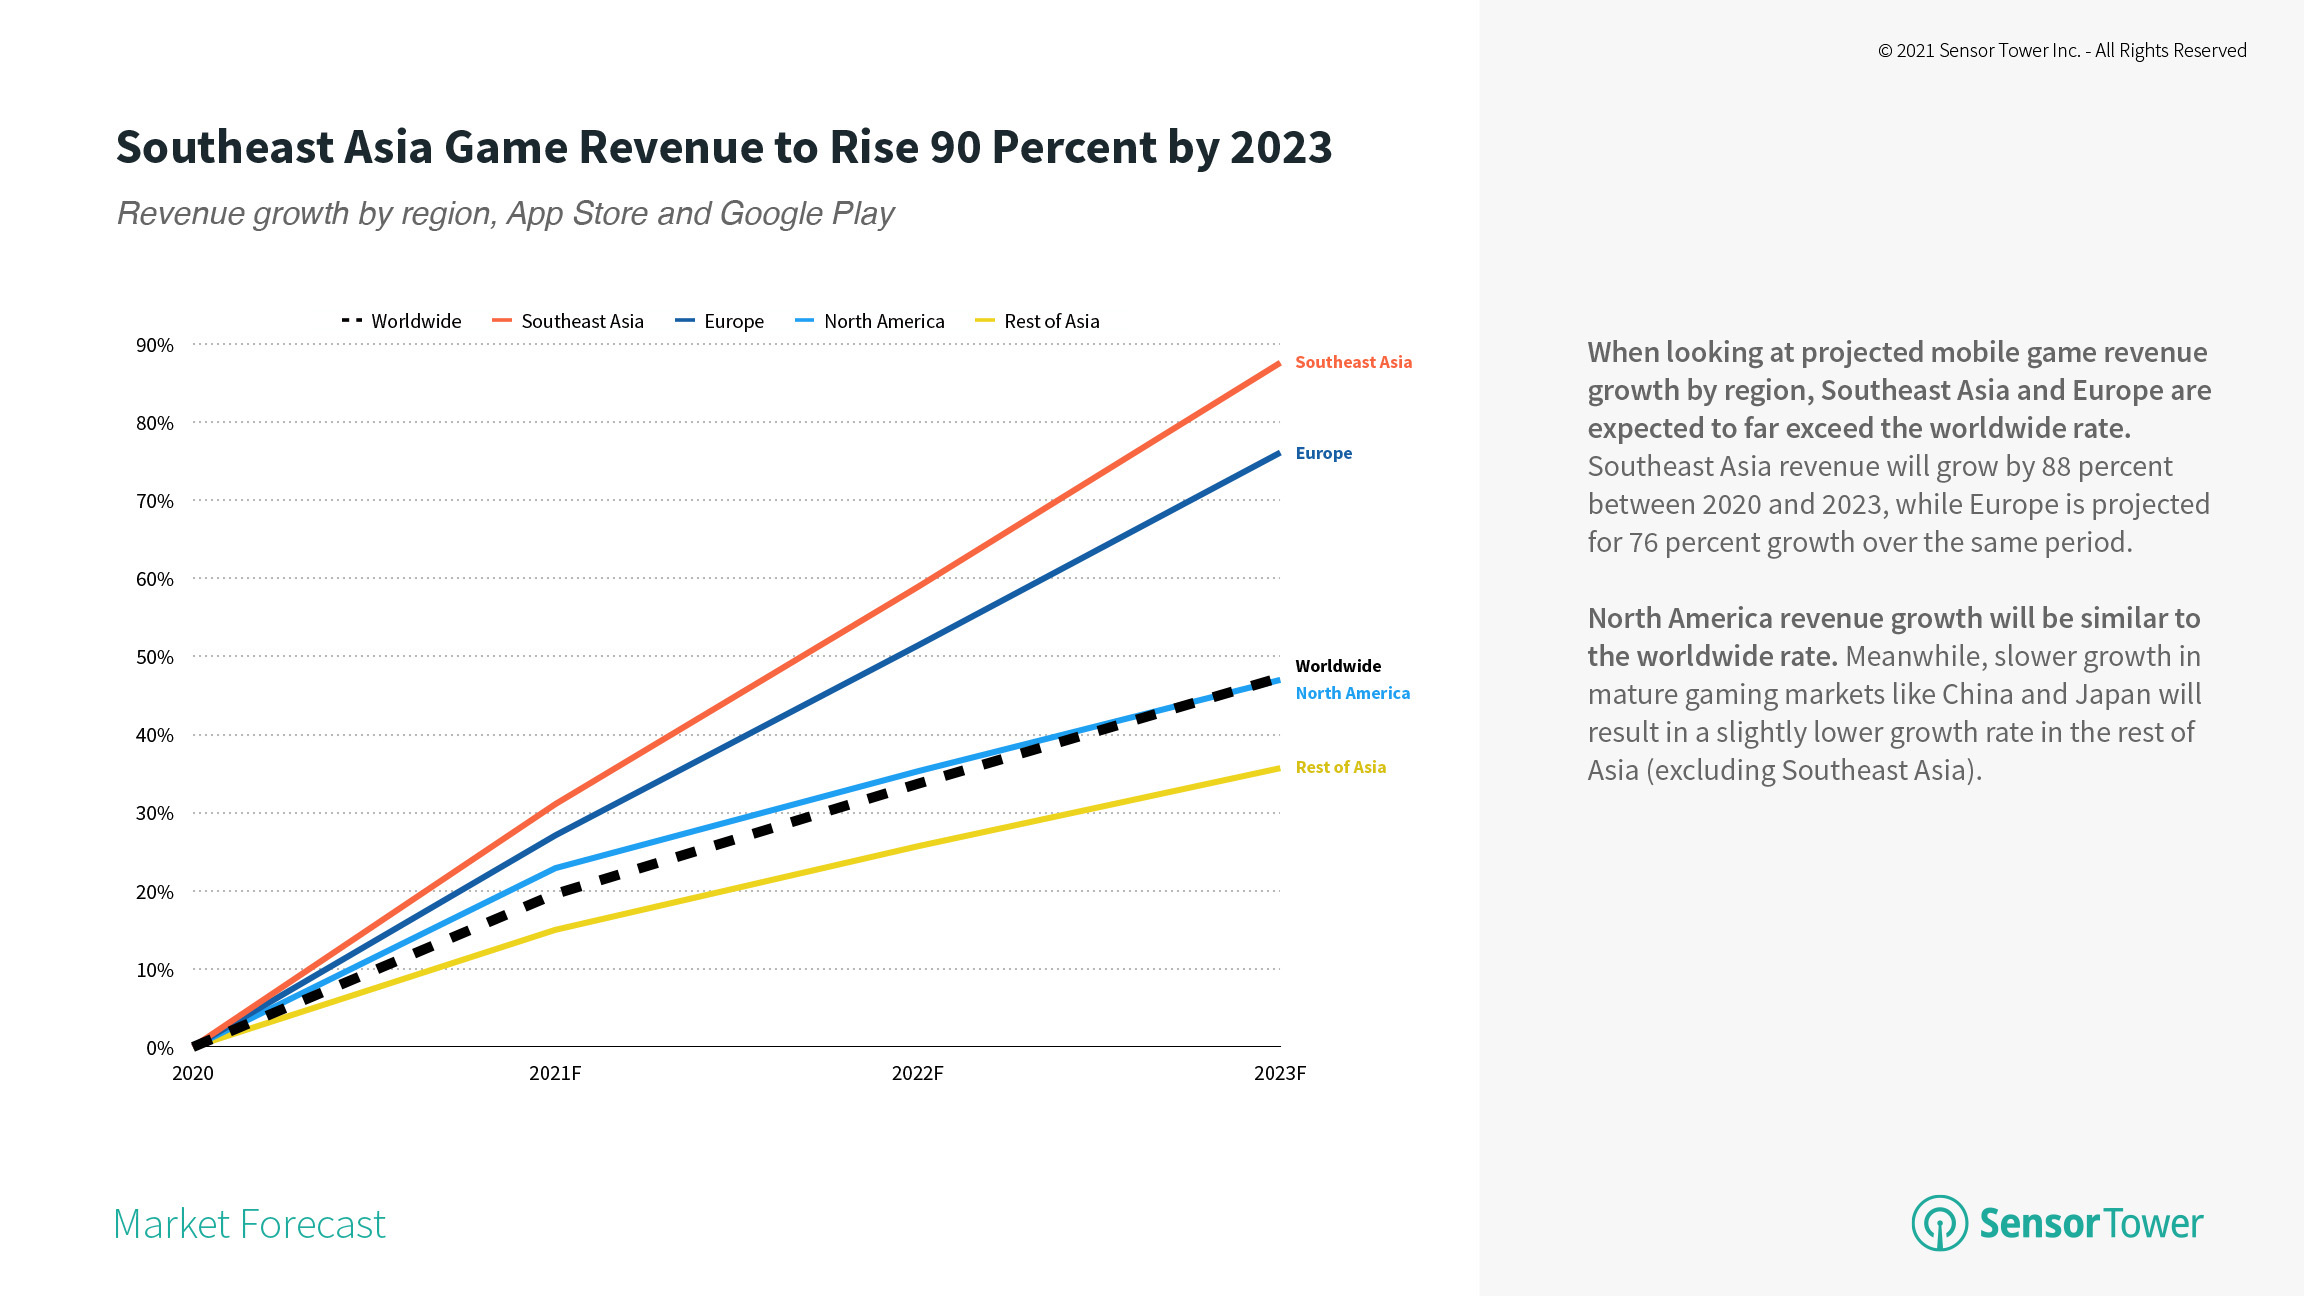 Mobile game revenue growth by region 2020 to 2023